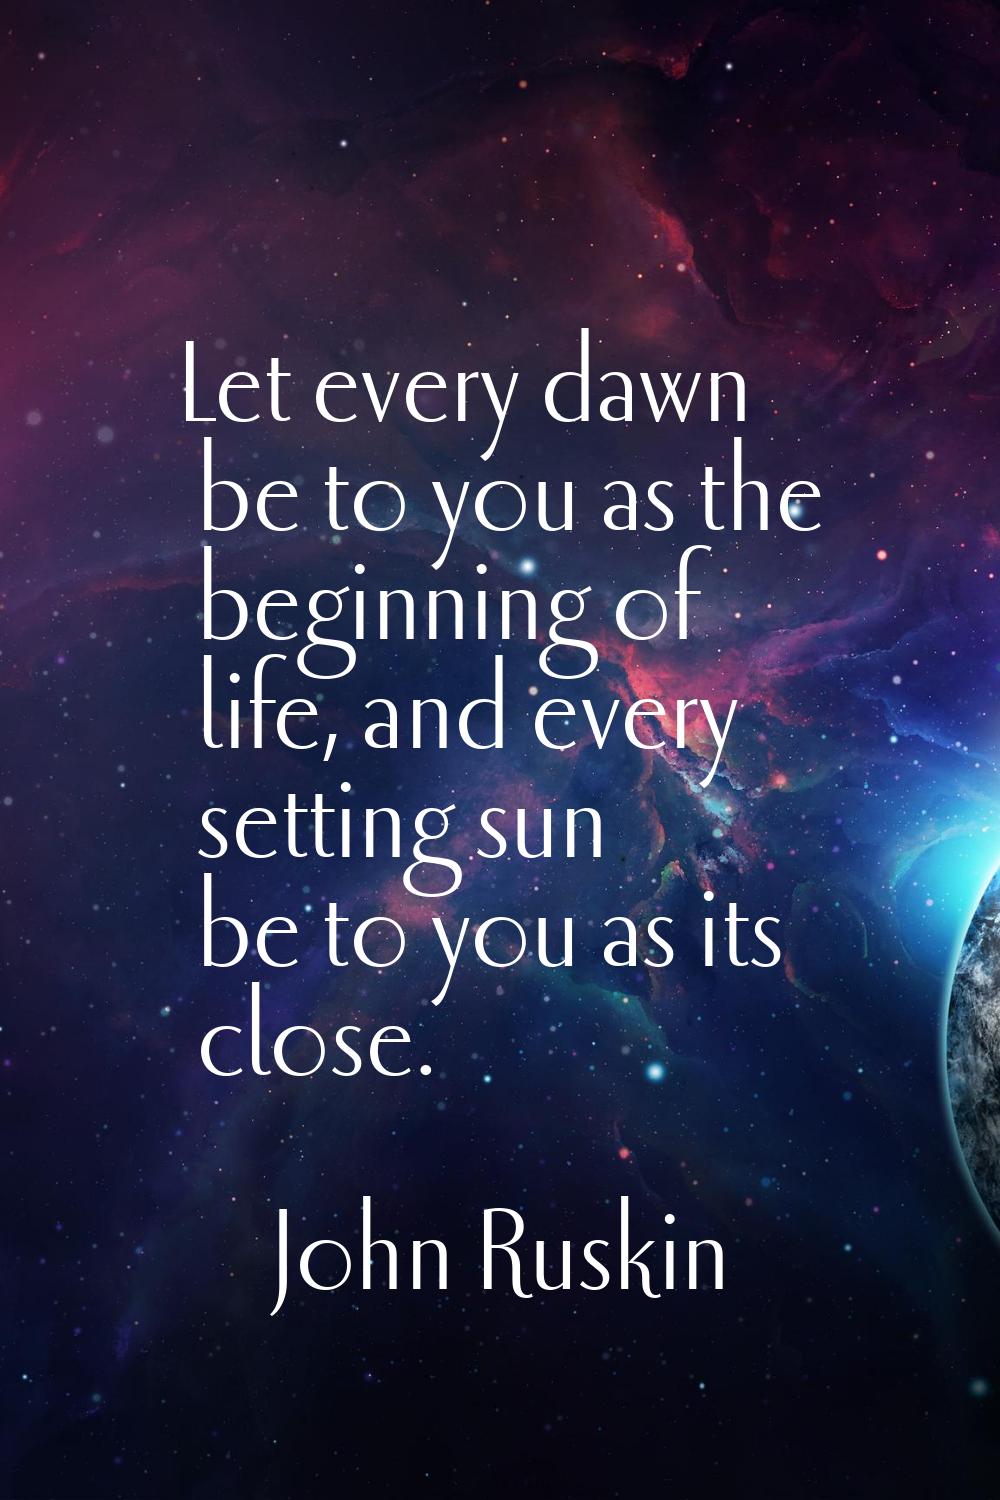 Let every dawn be to you as the beginning of life, and every setting sun be to you as its close.